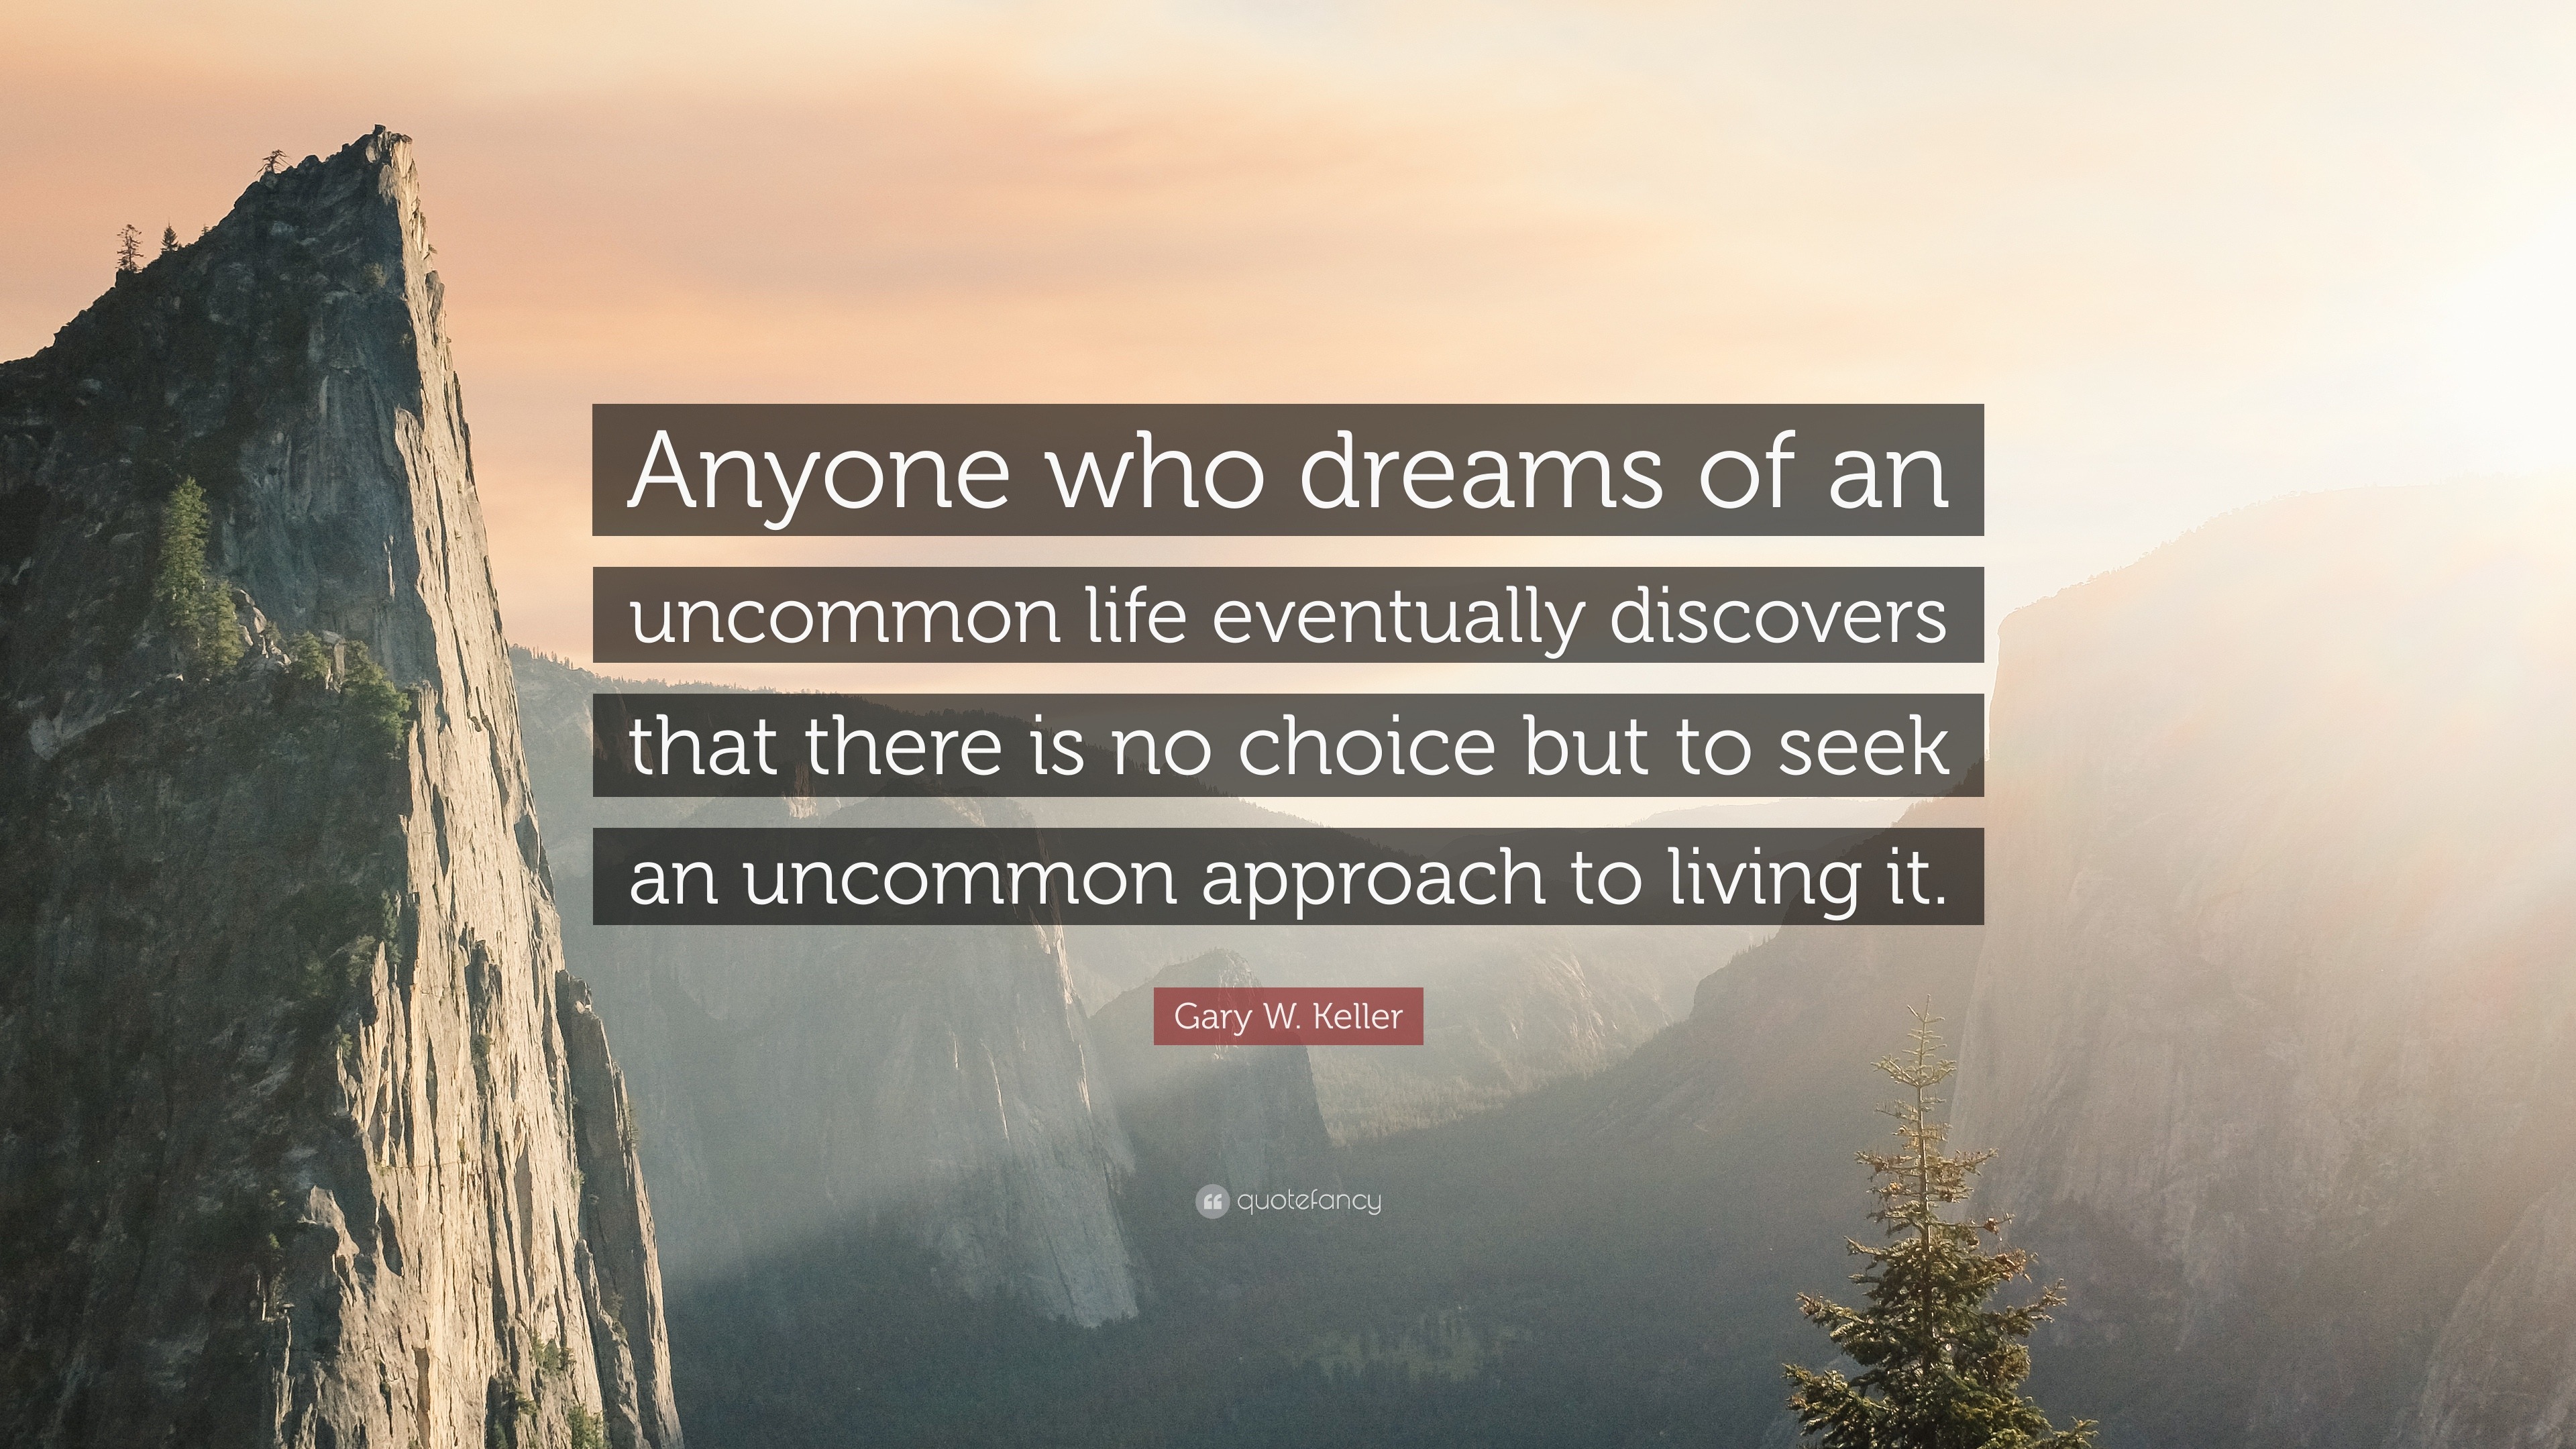 Gary W. Keller Quote: “Anyone who dreams of an uncommon life eventually  discovers that there is no choice but to seek an uncommon approach to l”